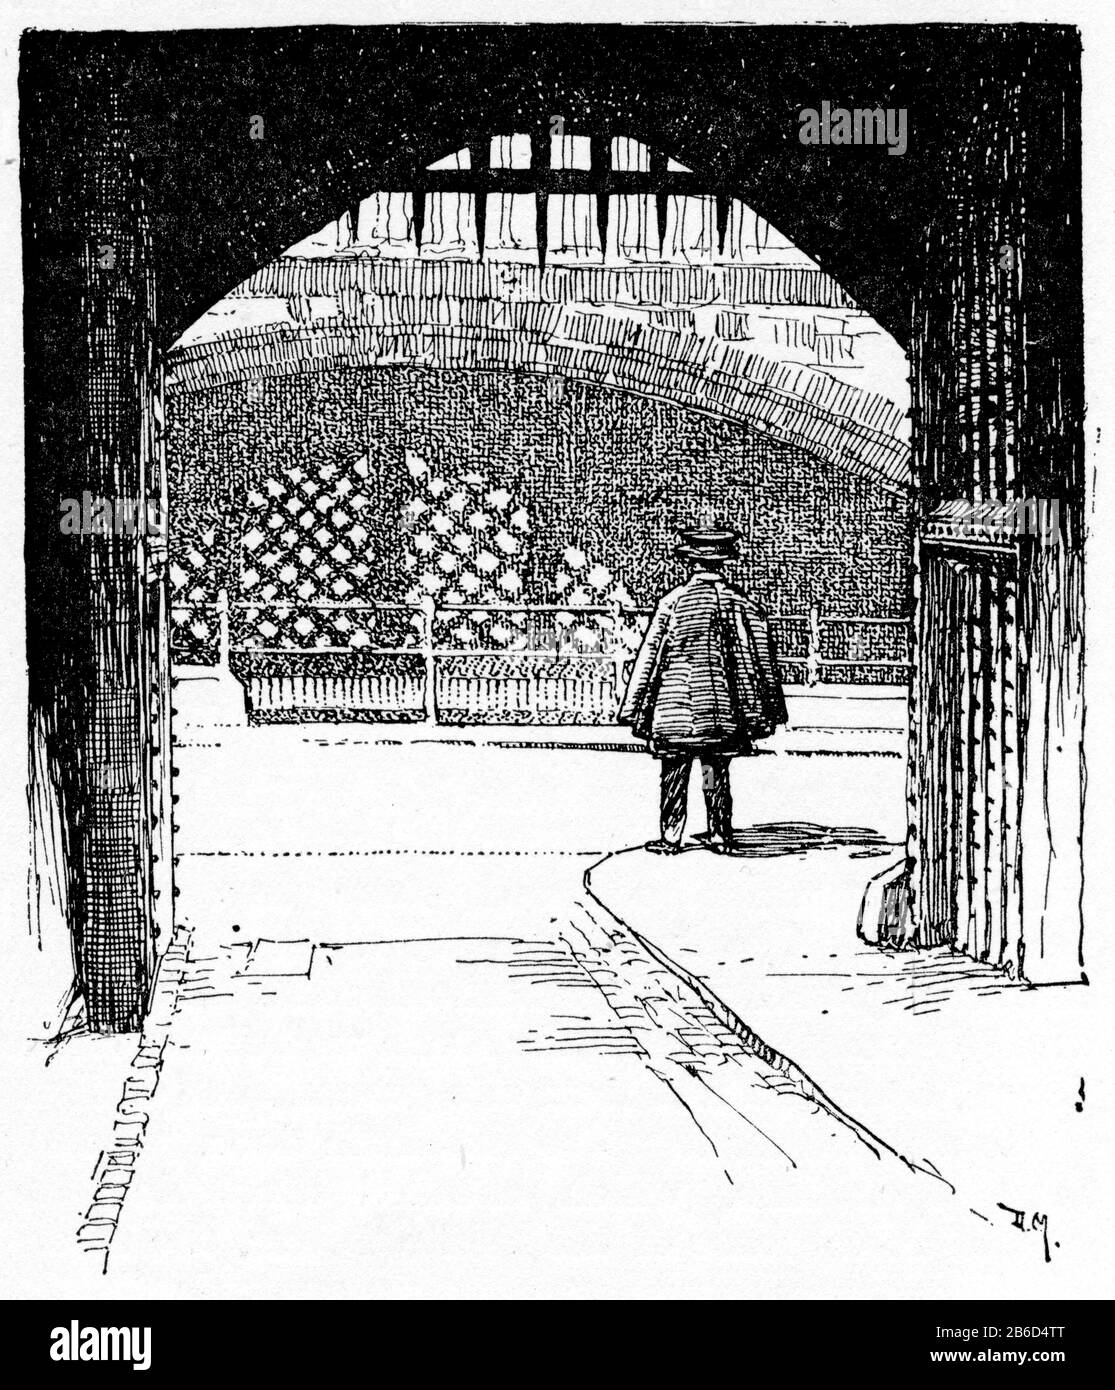 The Traitors Gate (from the gate of the Bloody Tower), Tower of London, London, c1926. By Donald Maxwell (1877-1936). The Tower of London, officially Her Majesty's Royal Palace and Fortress of the Tower of London, was founded towards the end of 1066 as part of the Norman Conquest of England. The Traitors' Gate is an entrance through which many prisoners of the Tudors entered the Tower of London. The gate was built by Edward I (1239-1307), to provide a water-gate entrance to the Tower. It is part of St. Thomas's Tower, which was designed to provide additional accommodation for the royal family. Stock Photo